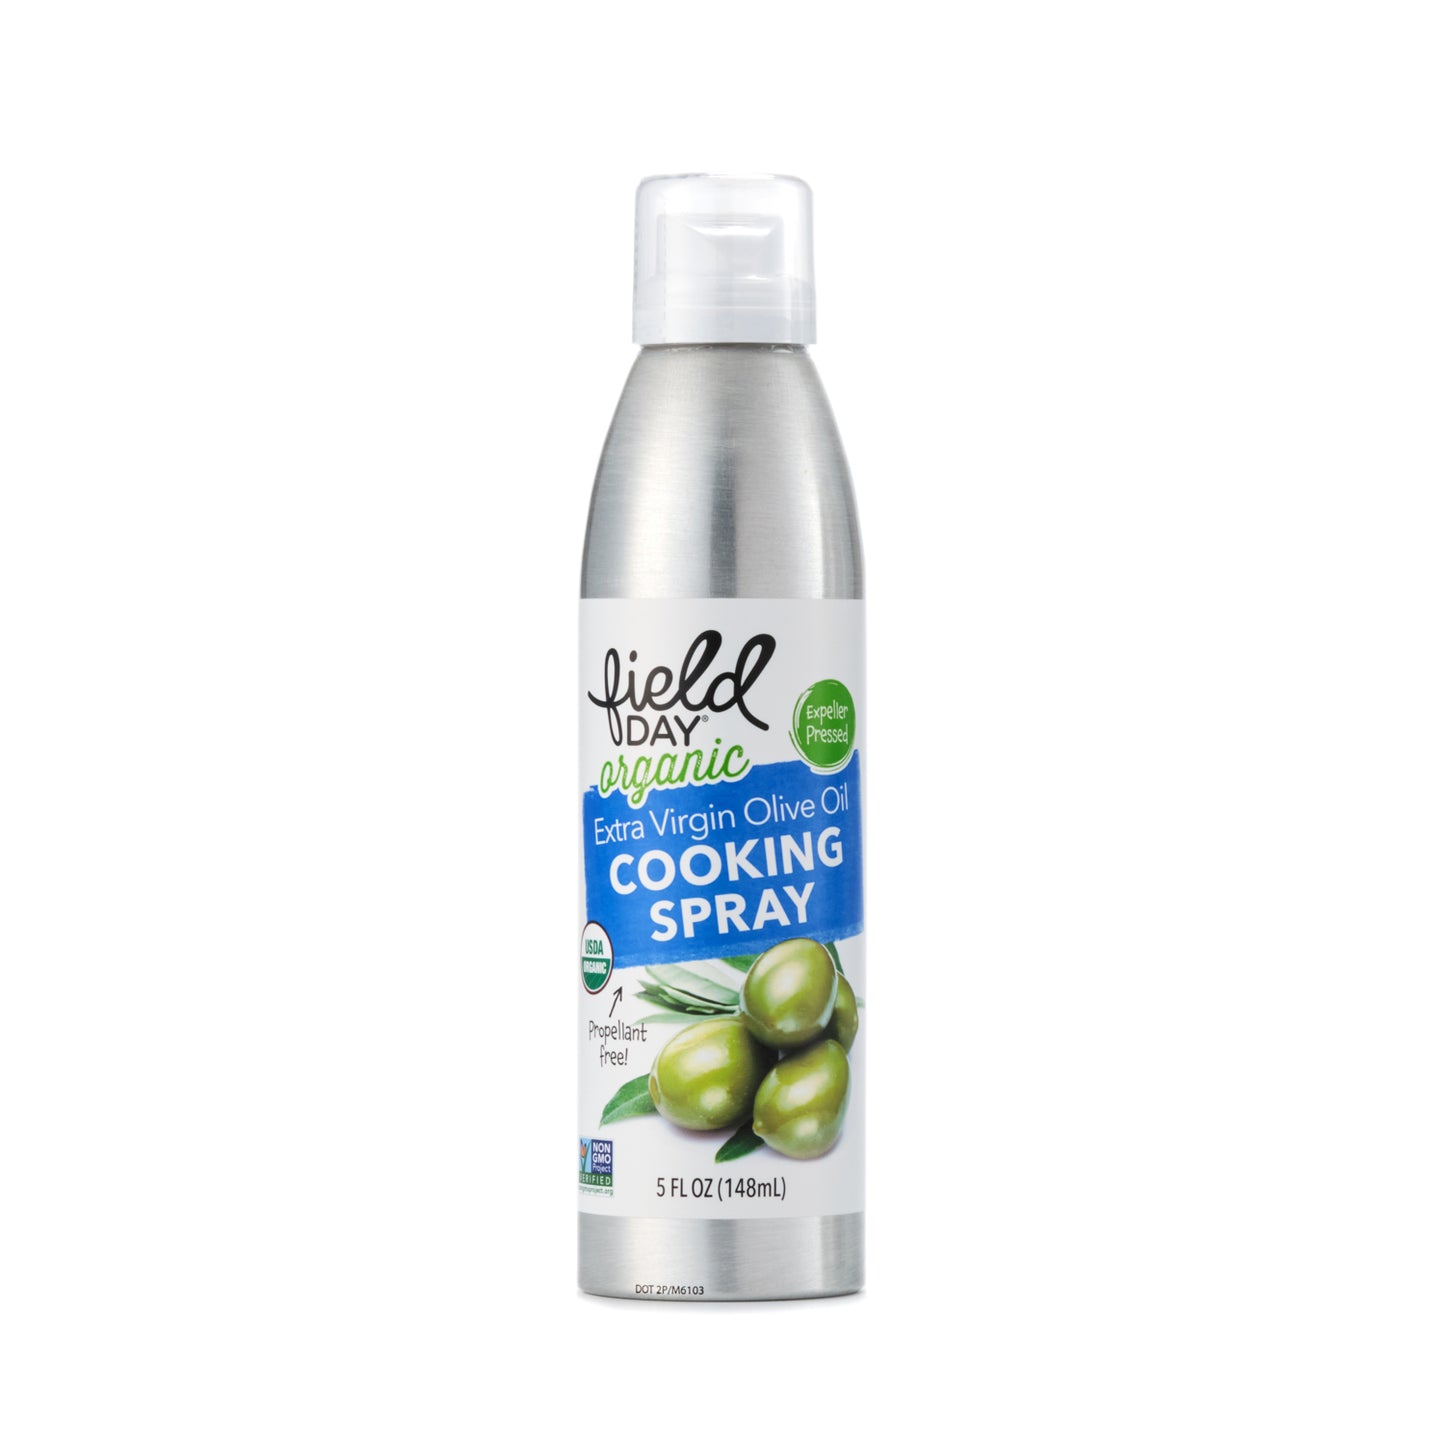 Field Day Organic Extra Virgin Olive Oil Cooking Spray 148ml